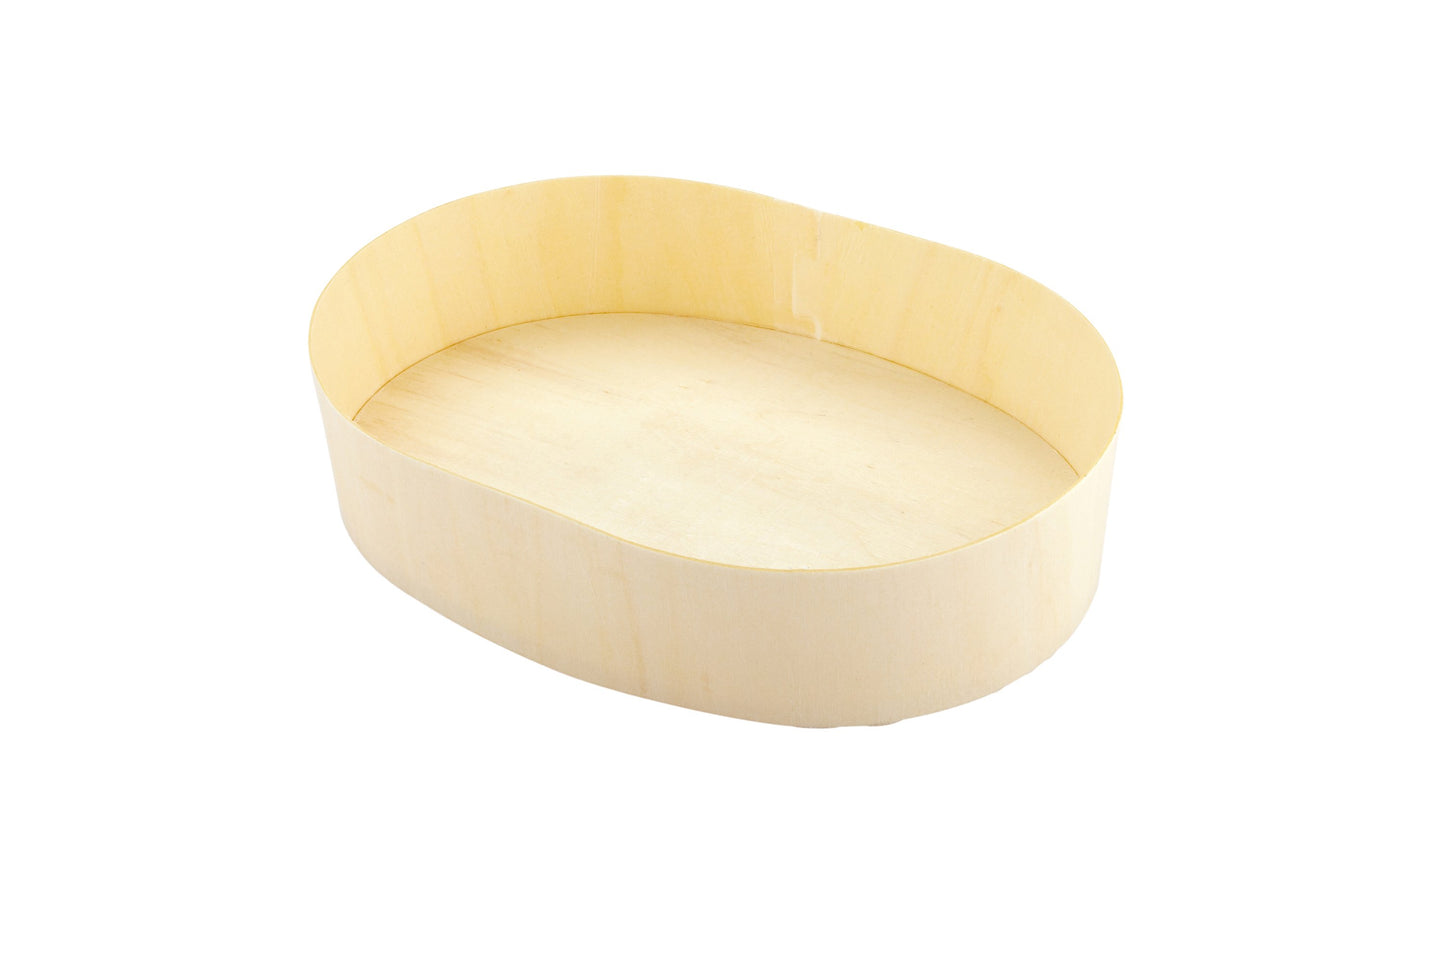 Taipei Collection Oval Poplar Container 7.6 inches 100 count box